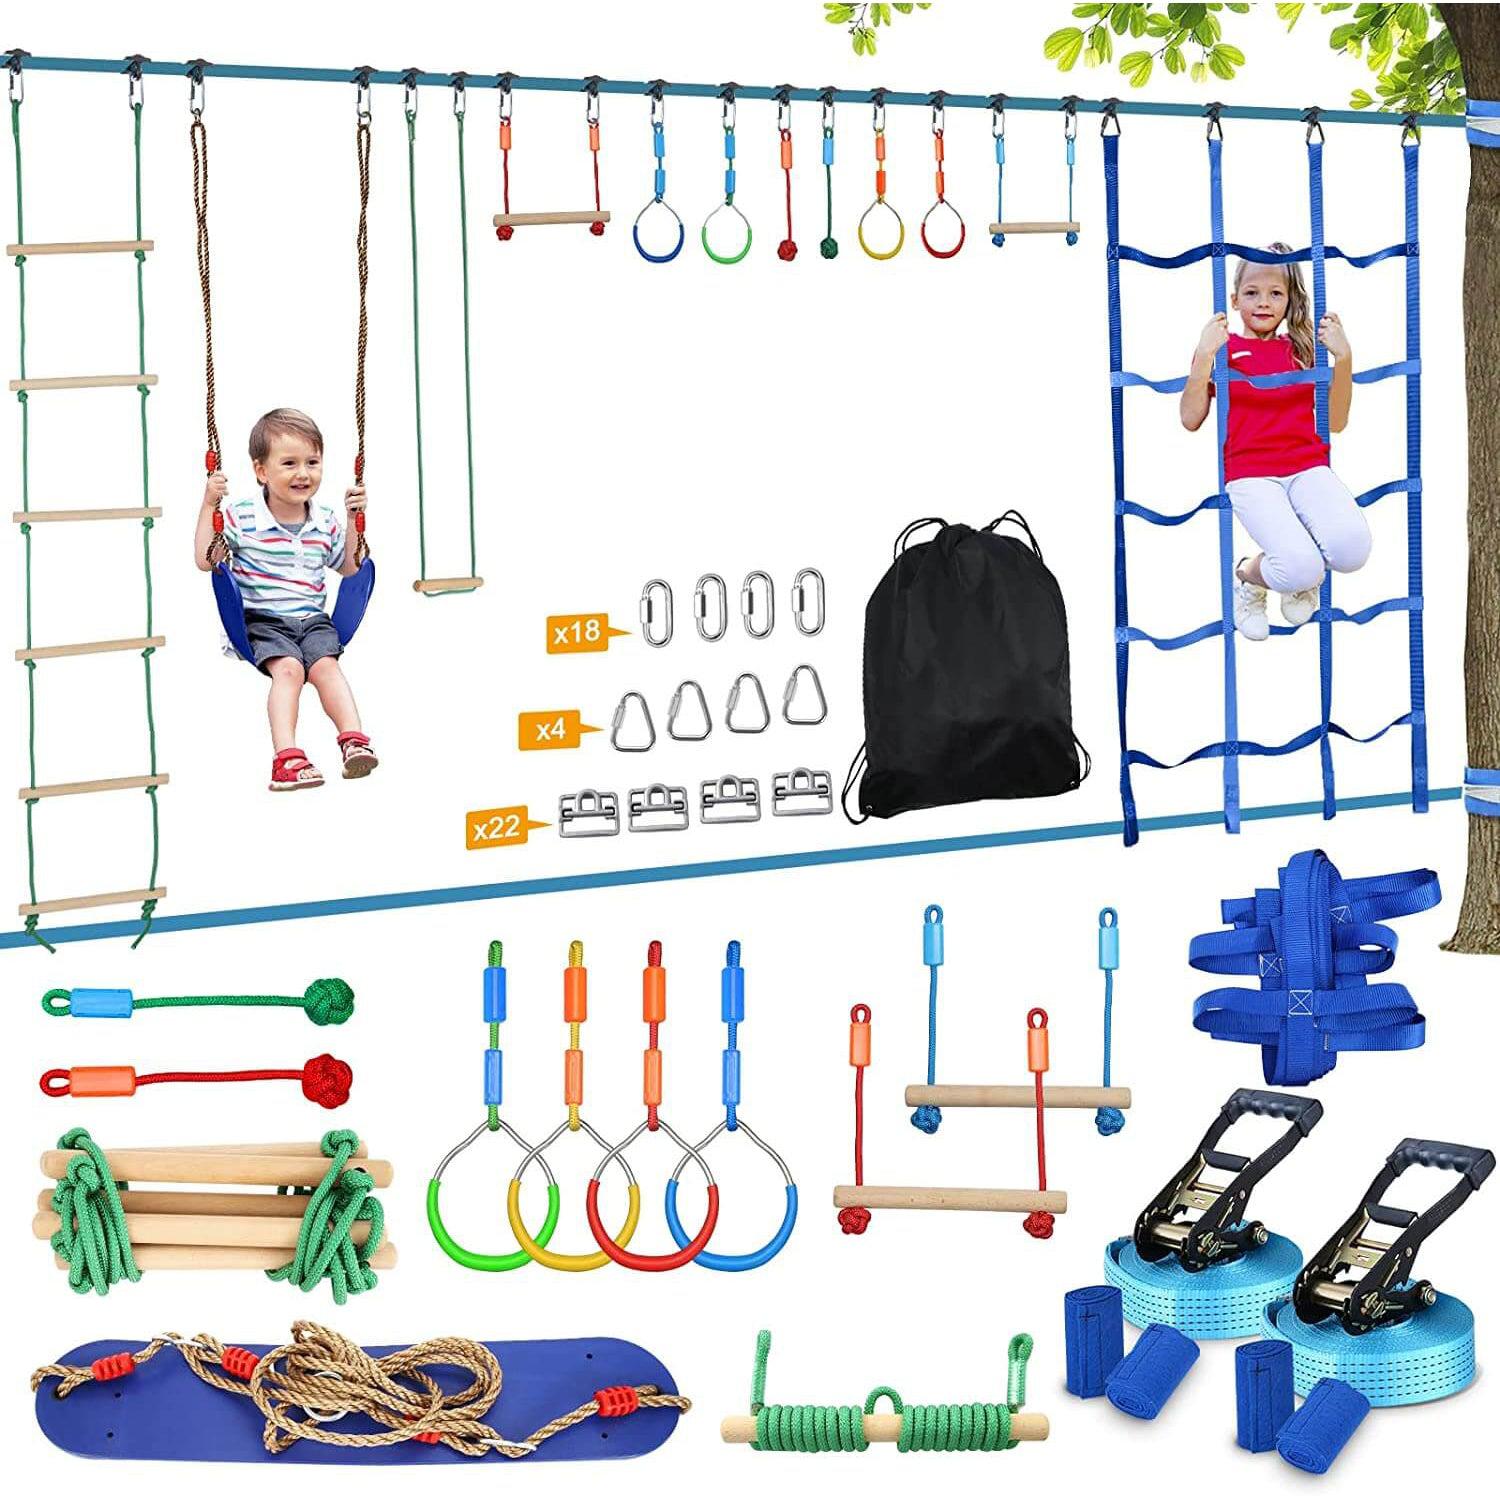 Ninja Warrior Obstacle Course for Kids with 12 Accessories for Backyard